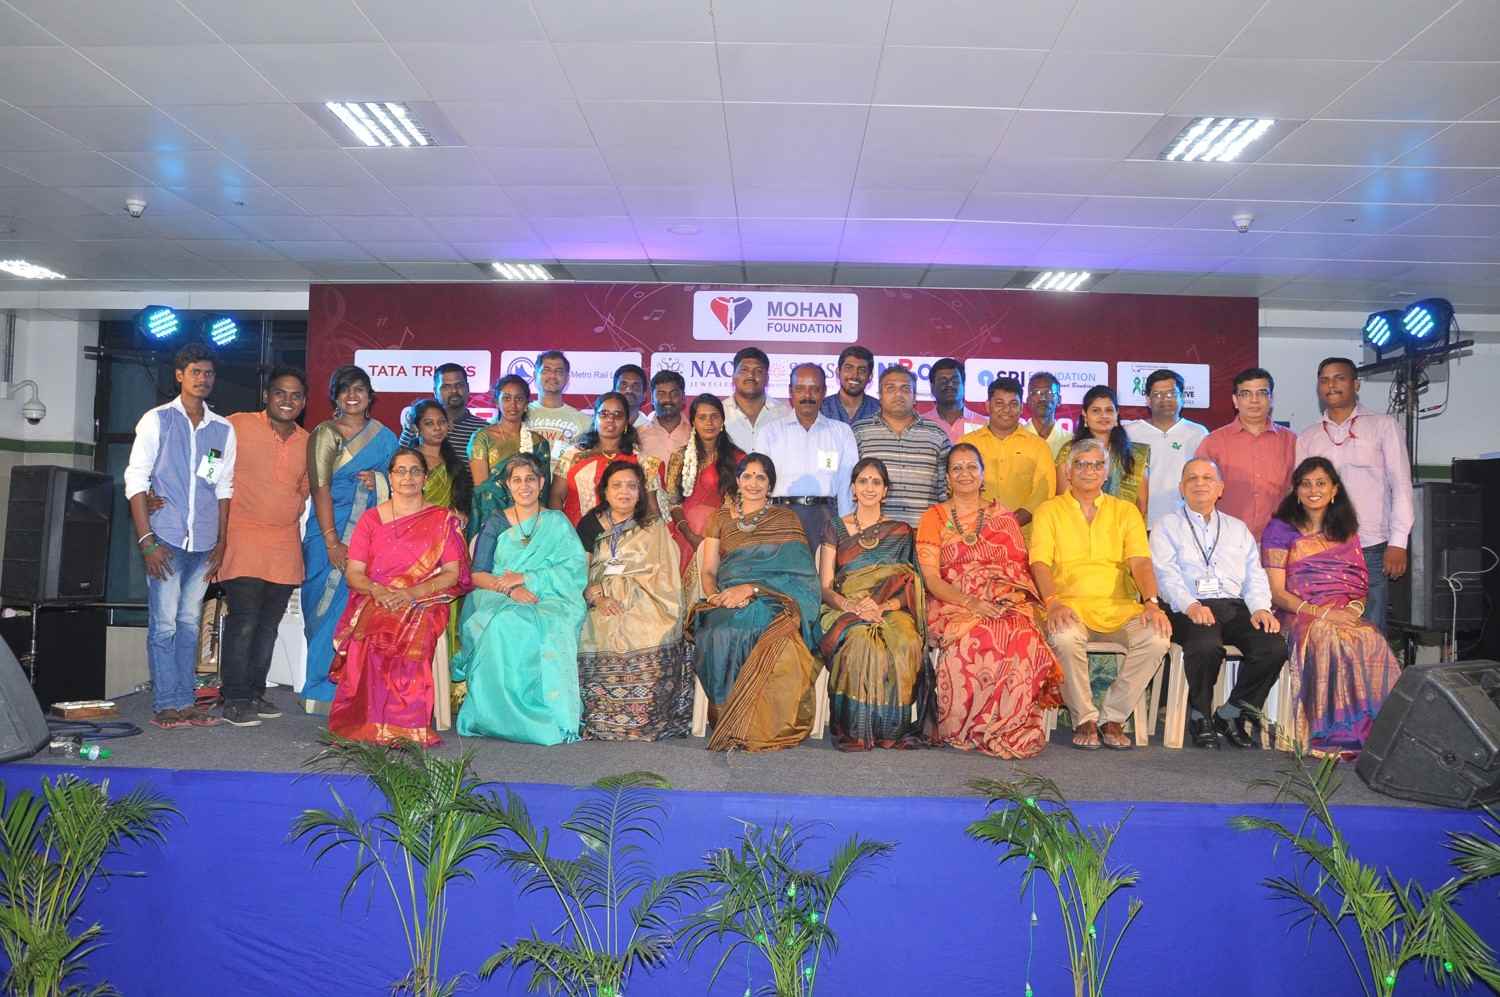 The MOHAN Foundation team.